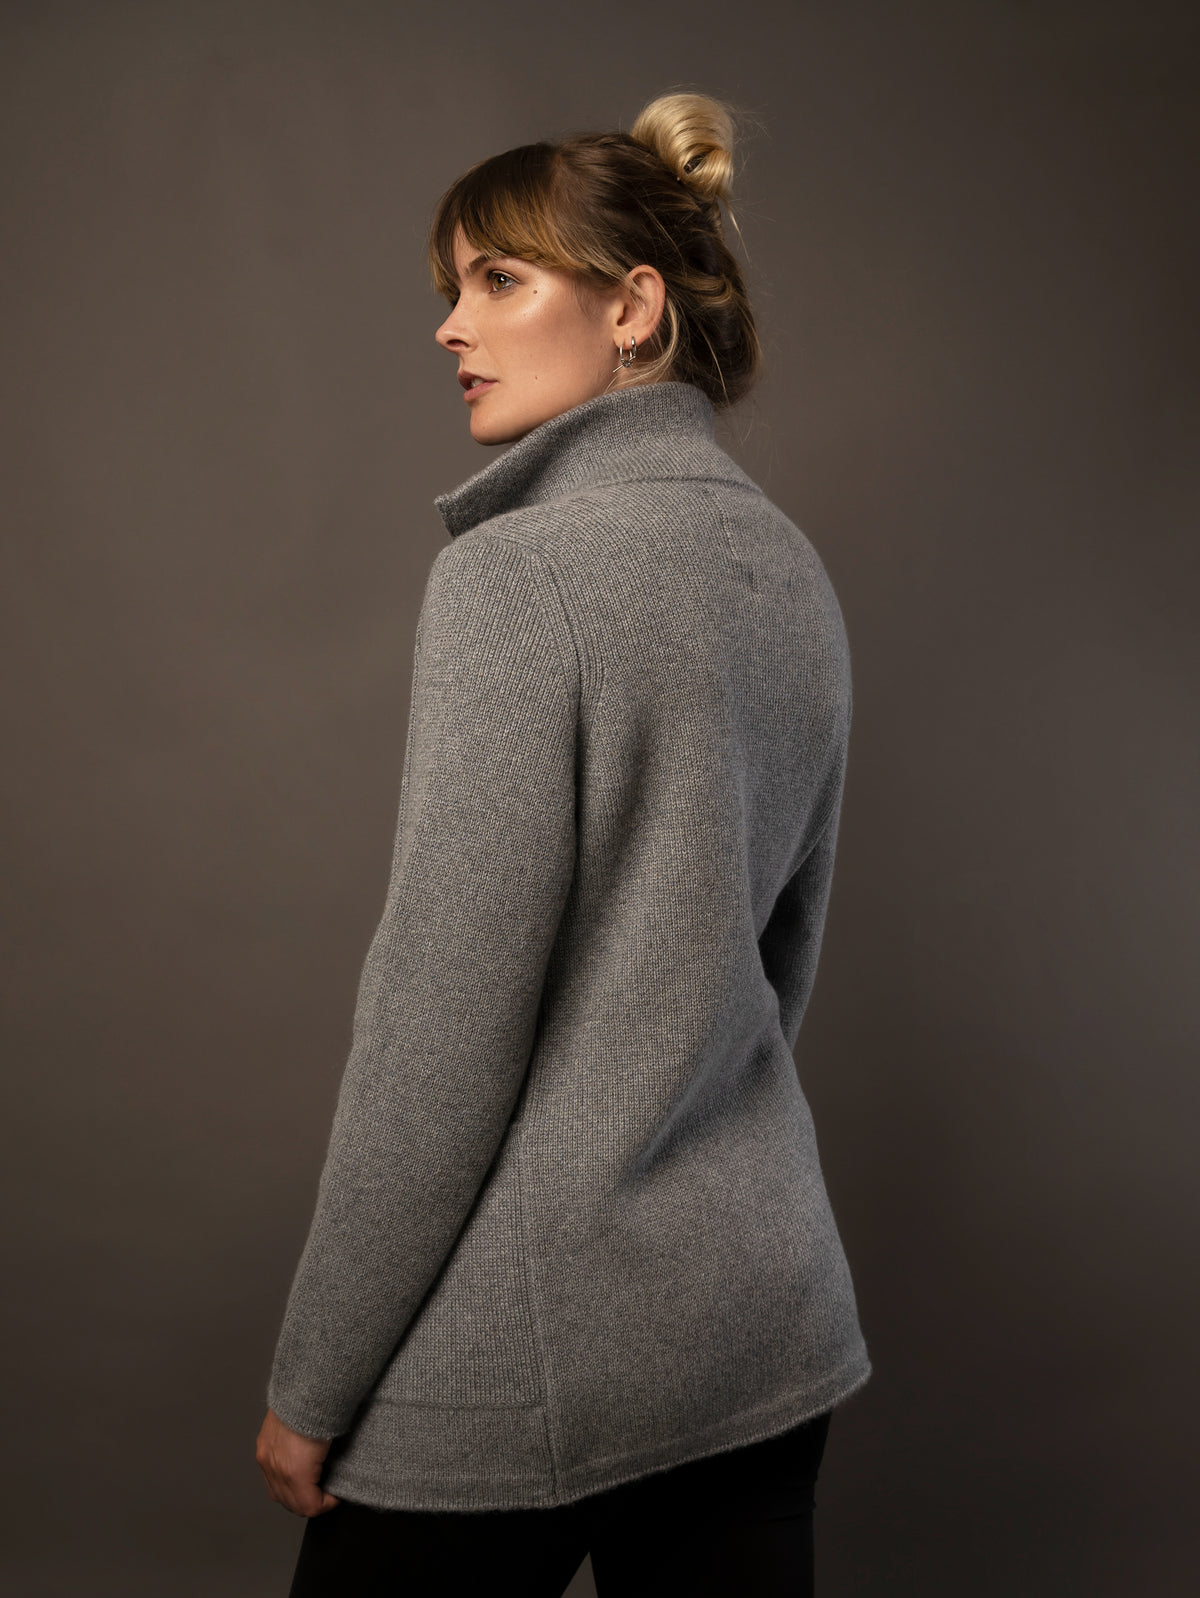 Ladies Cashmere Duffle Coat in Dark Grey. 100% cashmere handmade under the Royal Warrant in the UK. This is Cashmere at it&#39;s finest. 